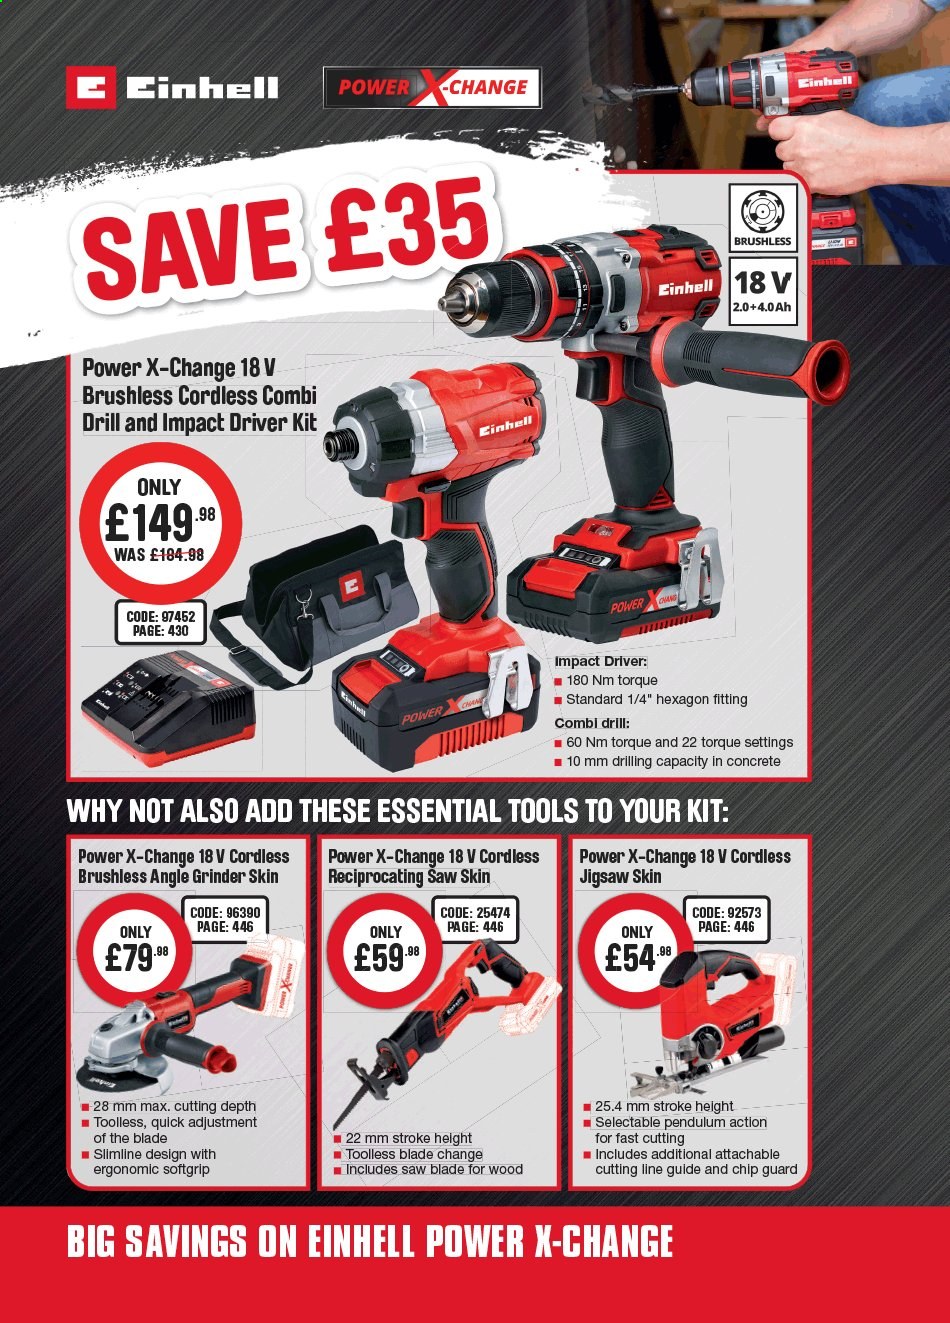 Toolstation offer . Page 444.